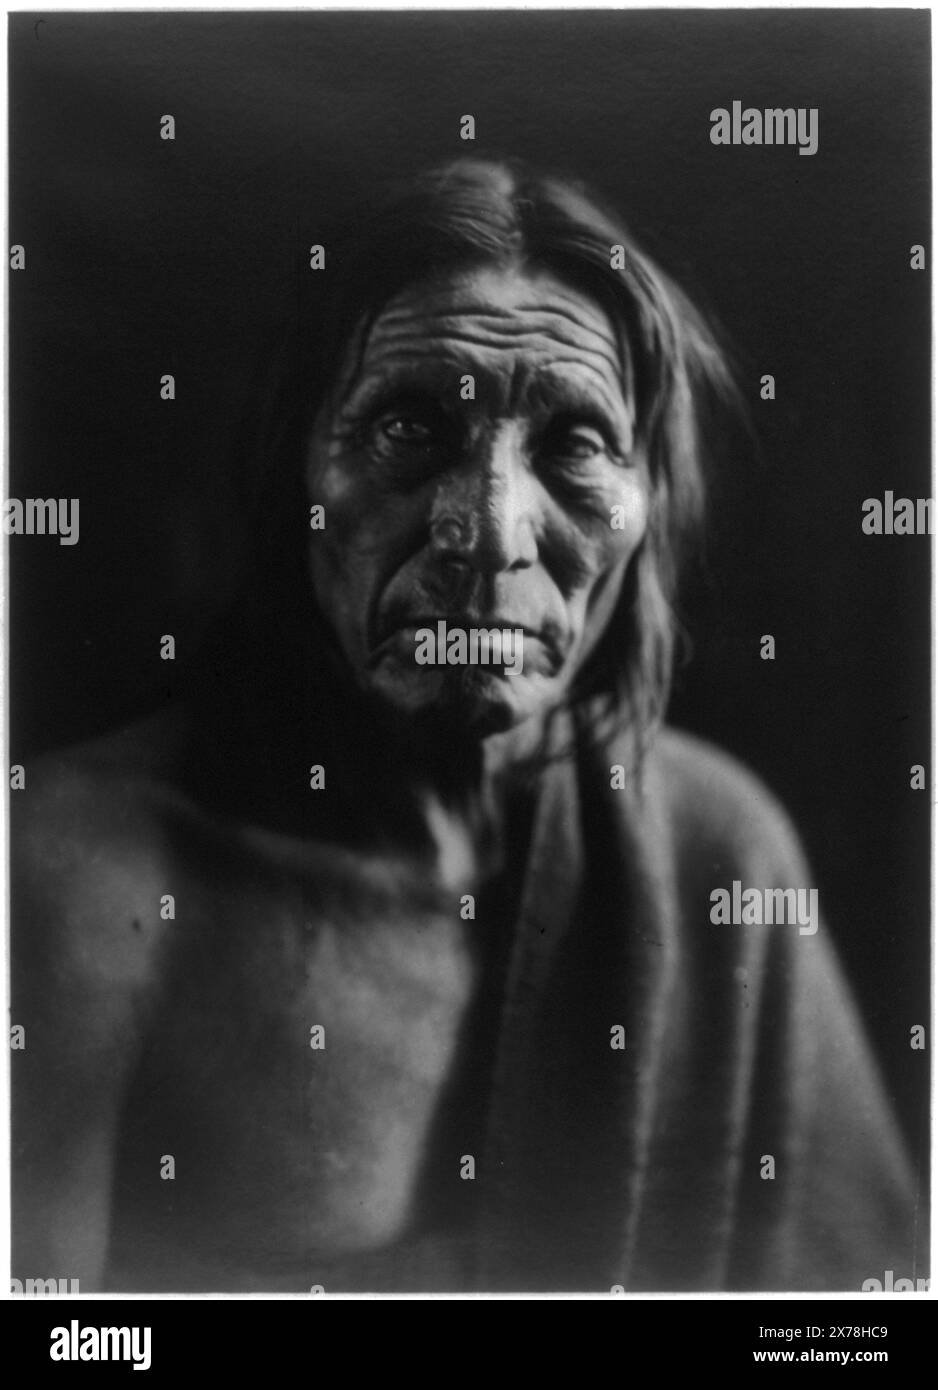 Big Head B, Curtis no. 295-05., LC no. 91., Forms part of: Edward S. Curtis Collection .. Big Head. , Indians of North America, 1900-1910. Stock Photo